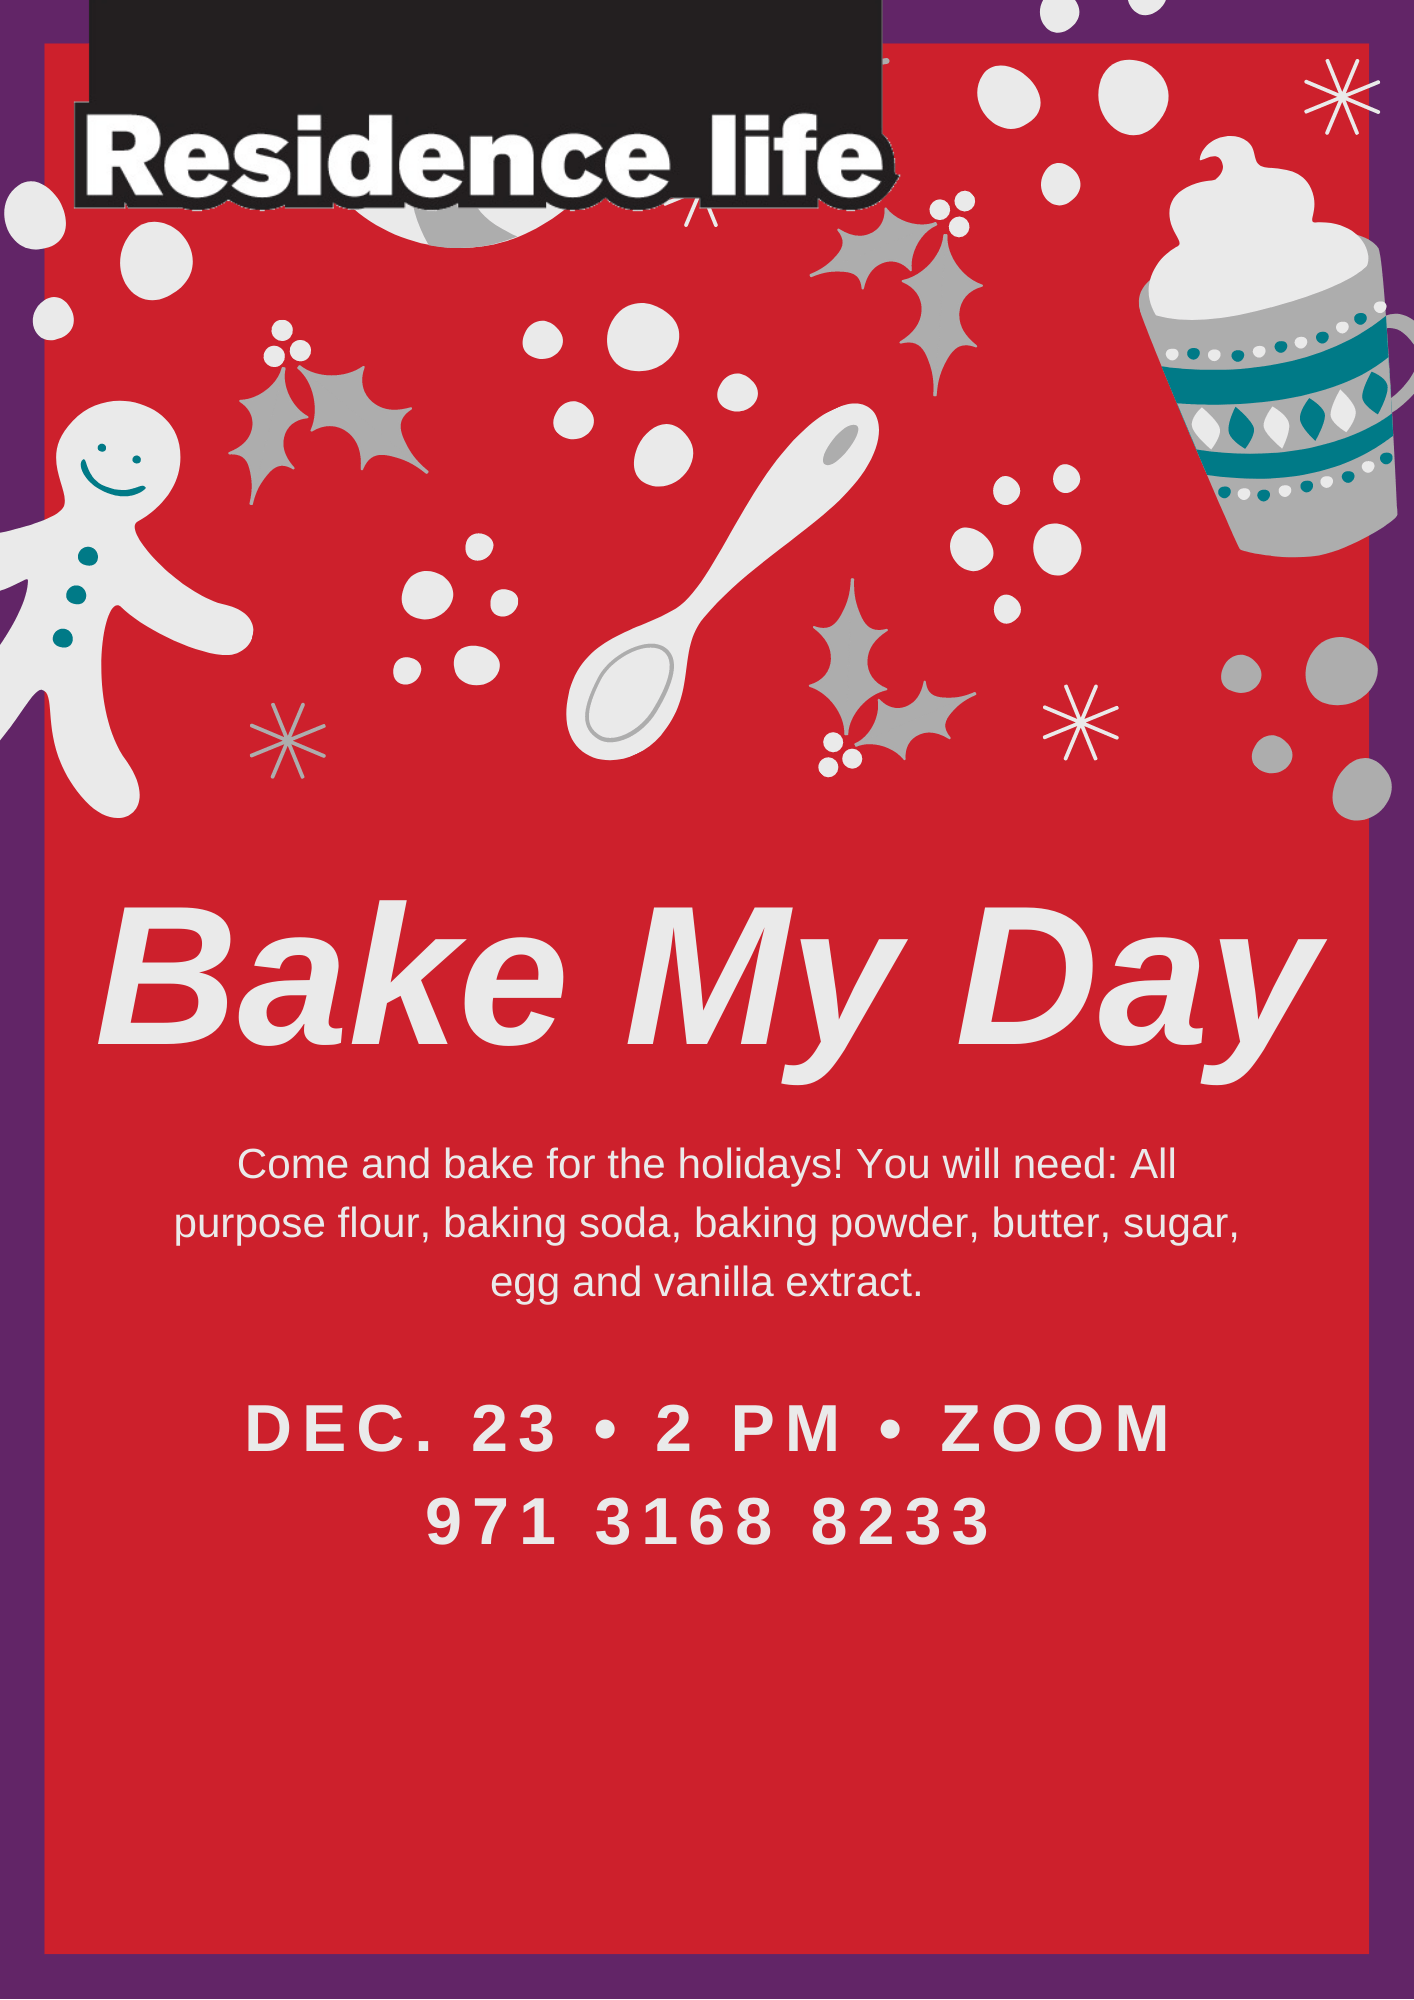 Poster for residence life programme bake my day. Come and bake for the holidays. You will need all purpose flour, baking soda, baking powder, butter, sugar, egg, and vanilla extract. 